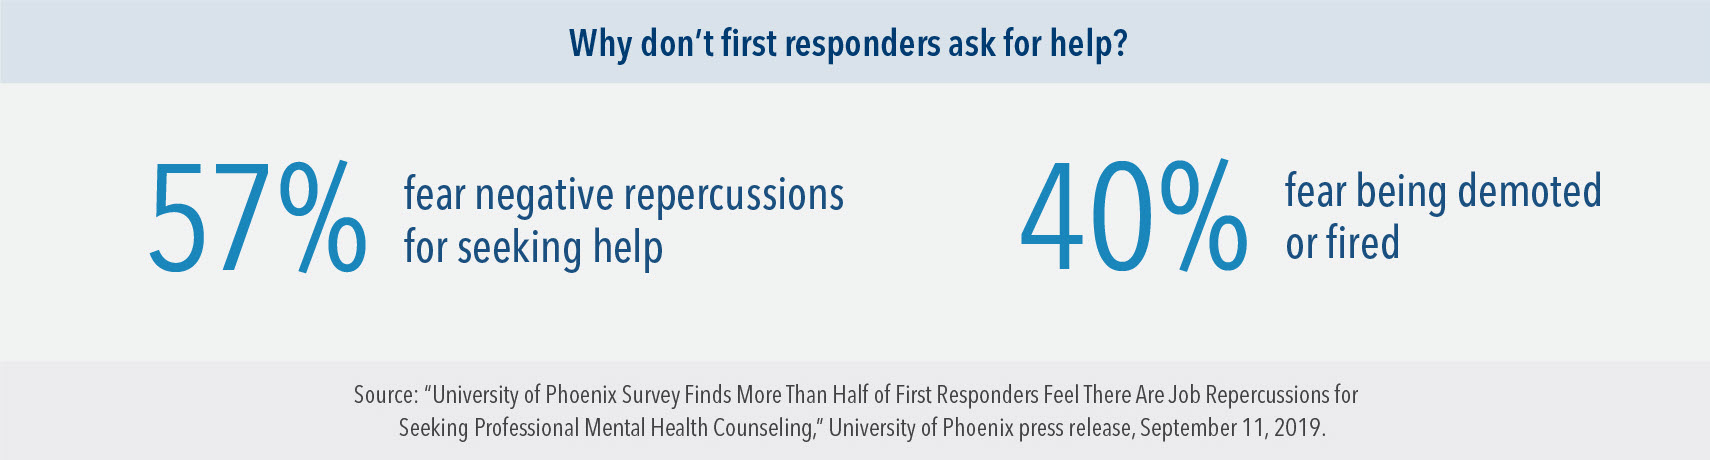 Why don’t first responders ask for help? 57% fear negative repercussions for seeking help, and 40% fear being demoted or fired.